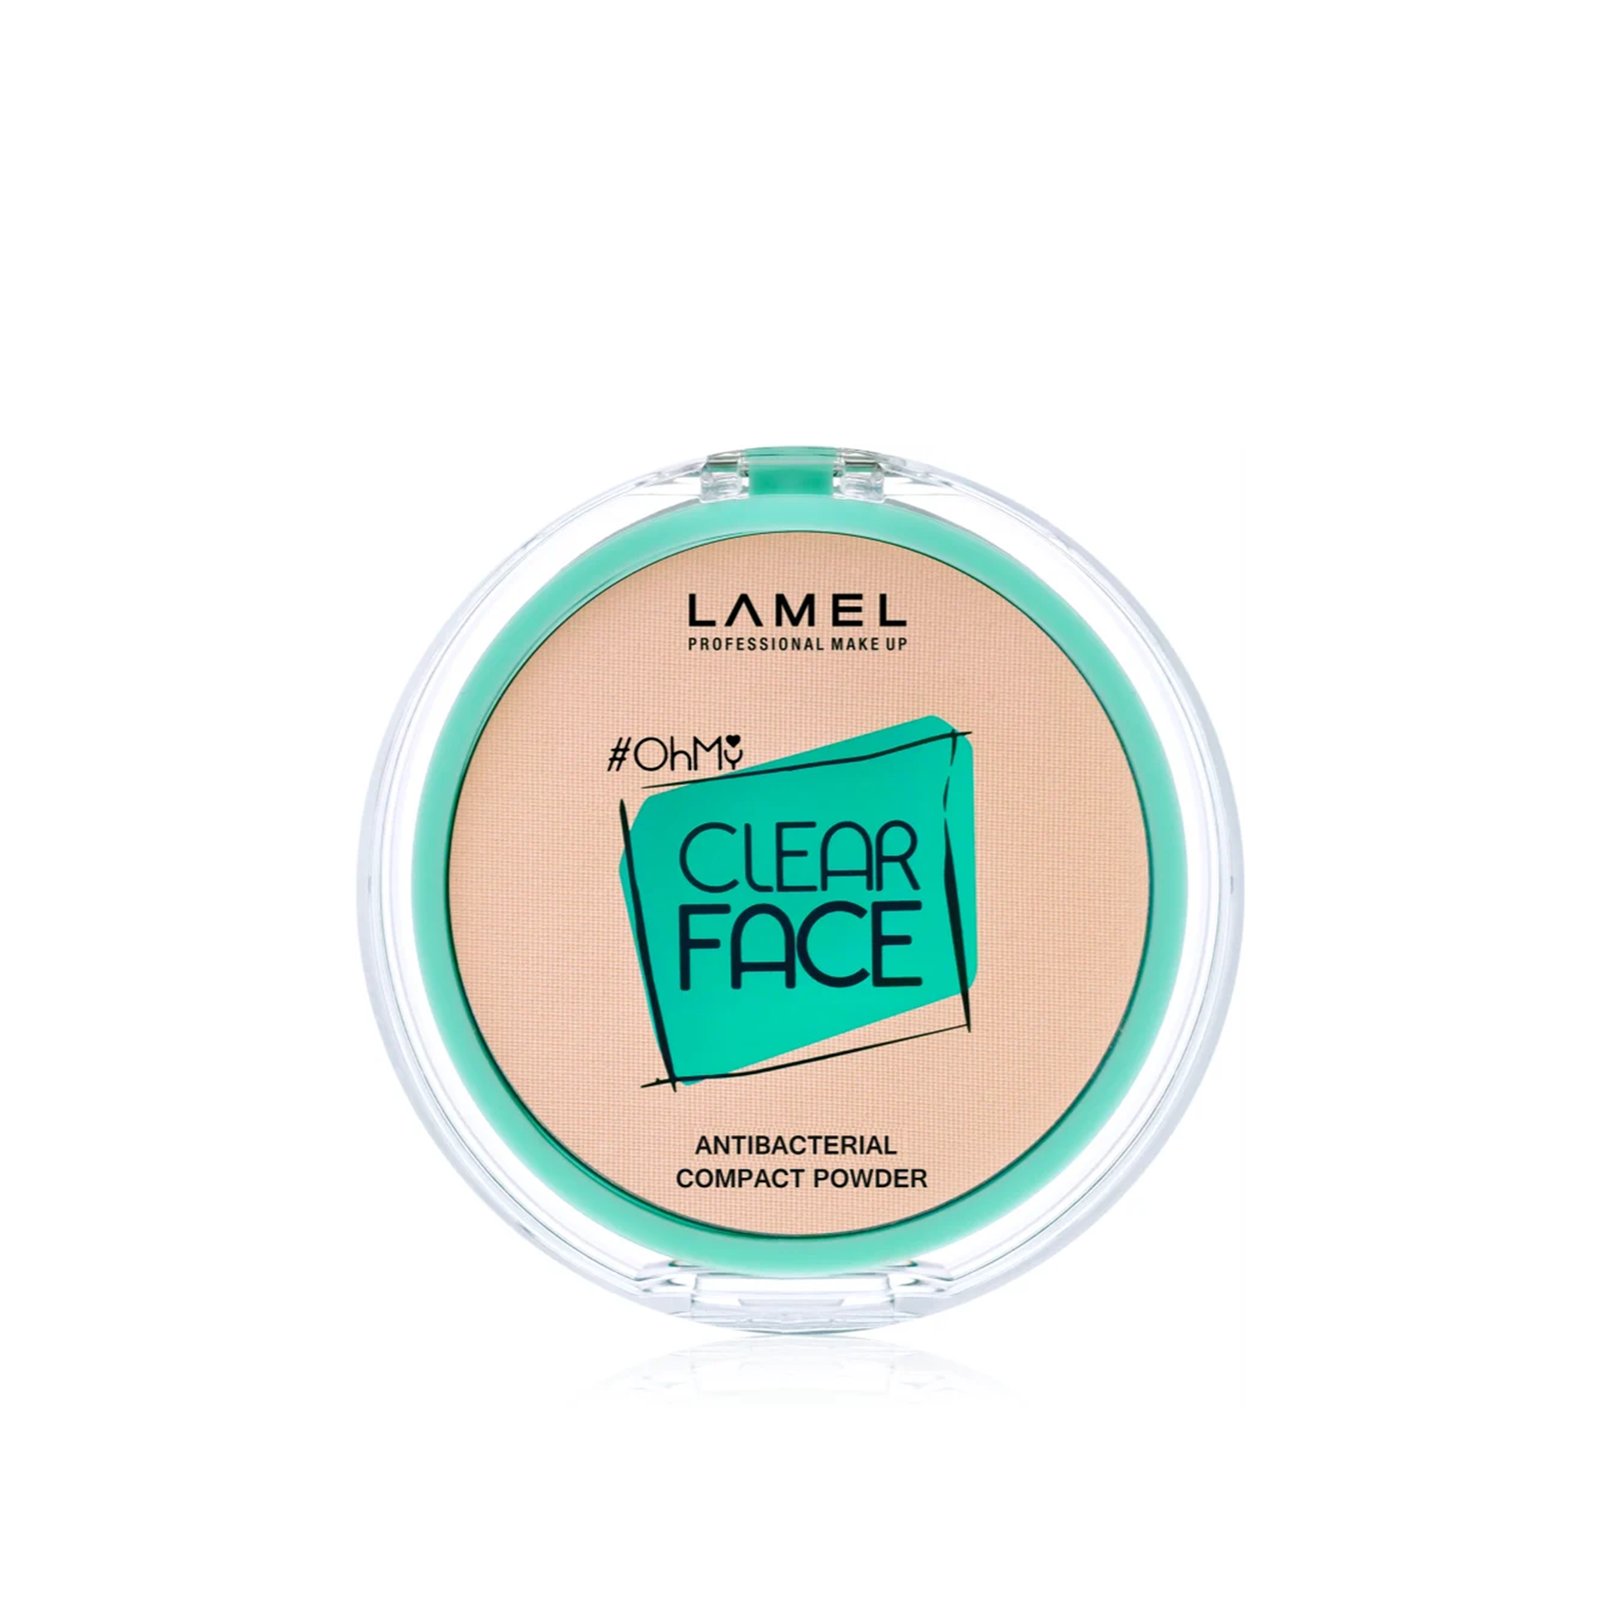 Lamel Oh My Clear Face Compact Powder 401 Light Natural 6g (0.21oz)